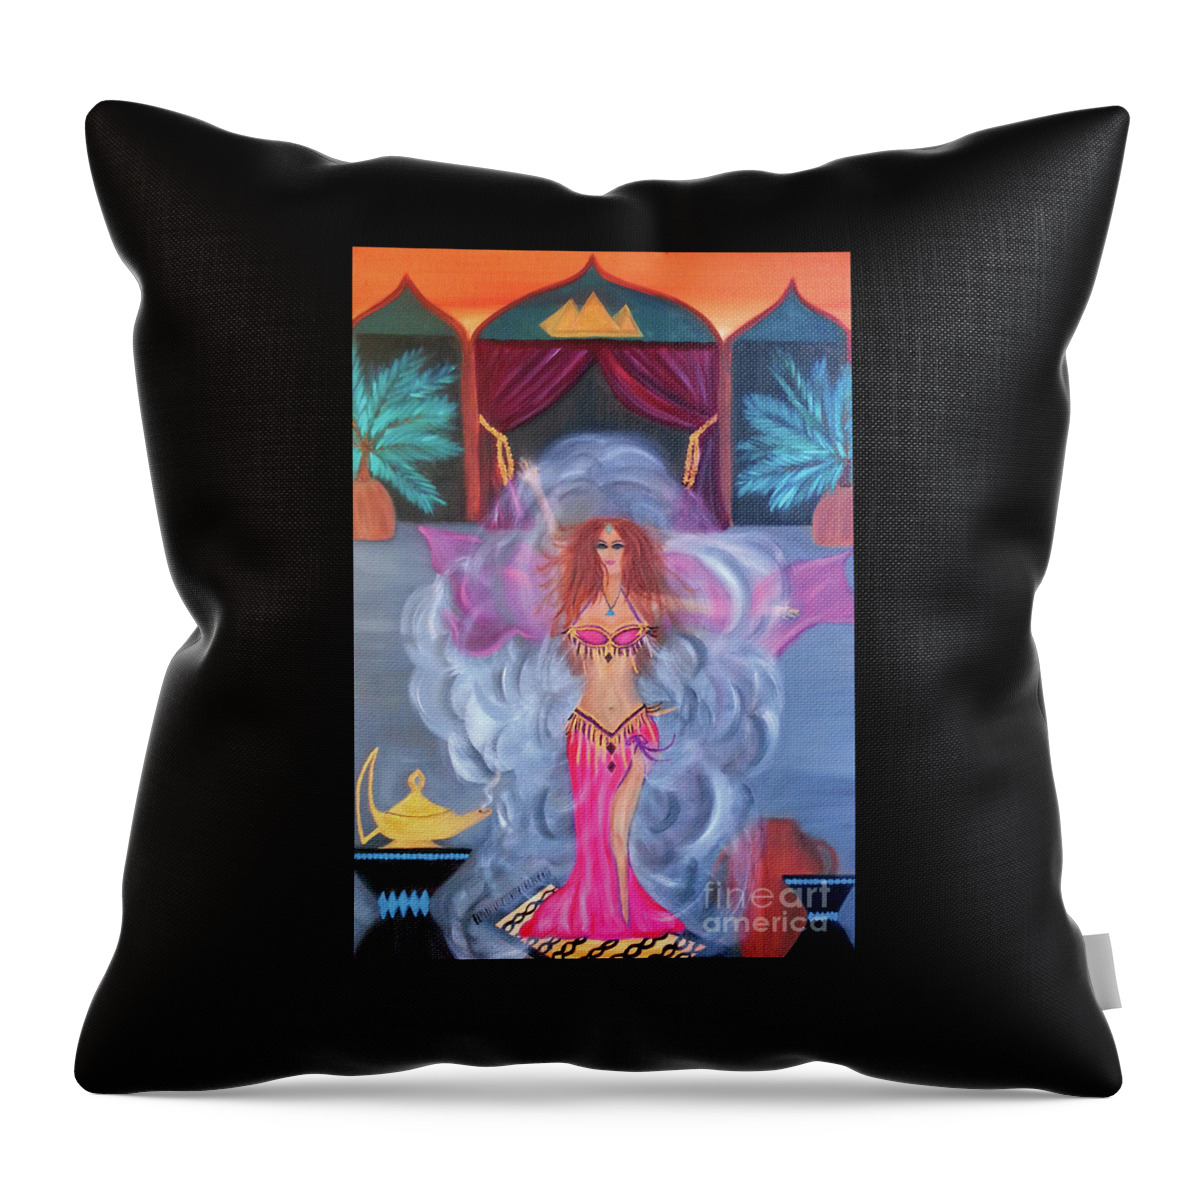 Belly Dance Throw Pillow featuring the painting Belly Dance Genie by Artist Linda Marie